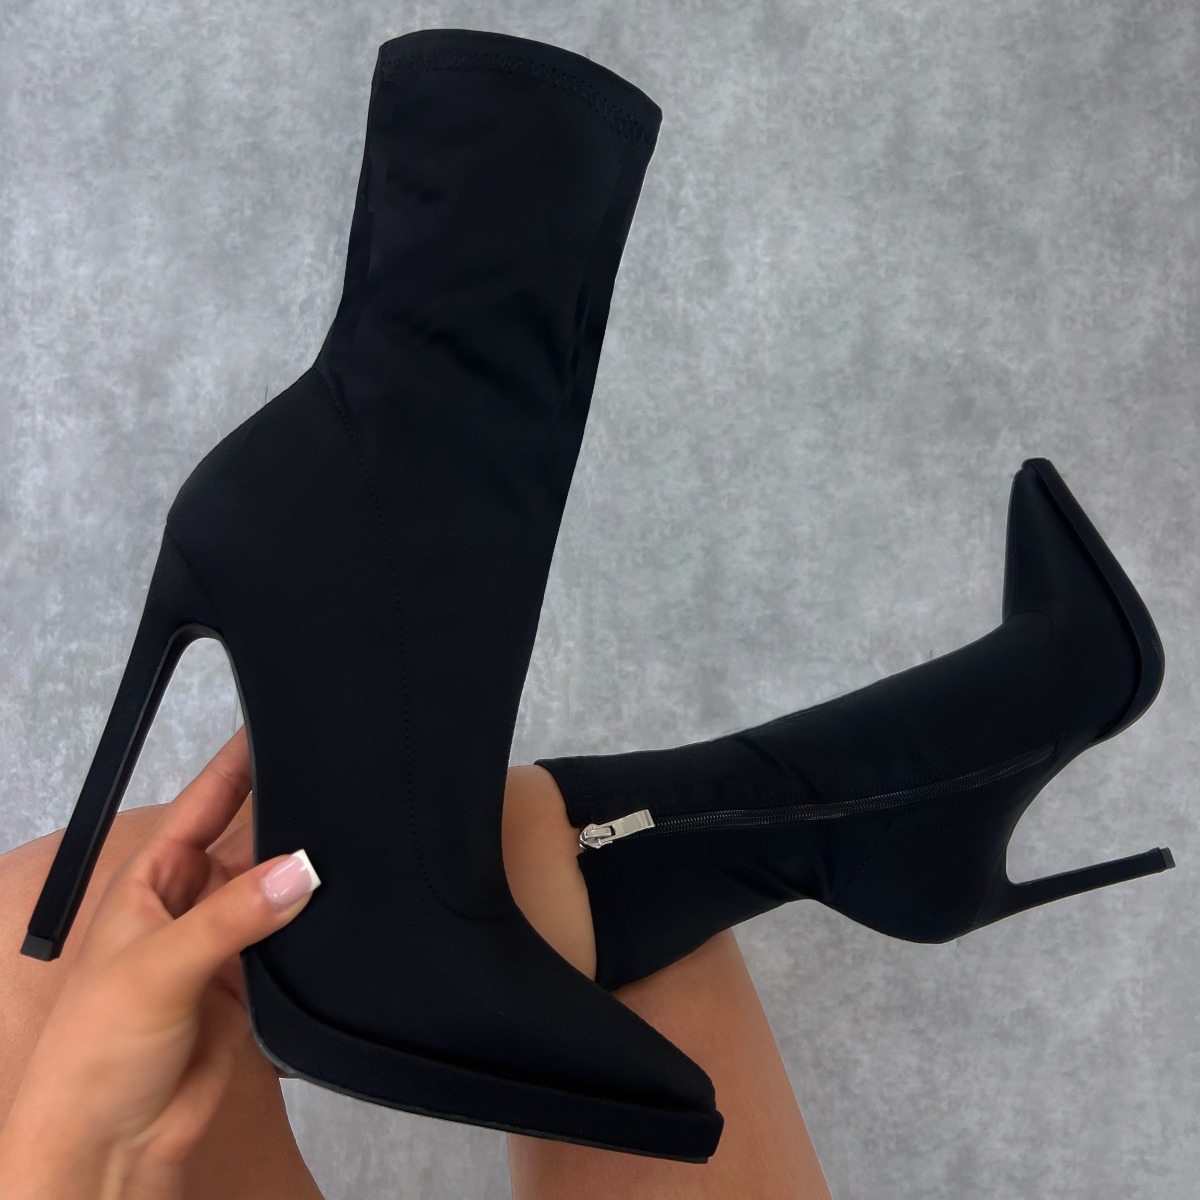 Lewin Black Lycra Pointed Stiletto Ankle Boots